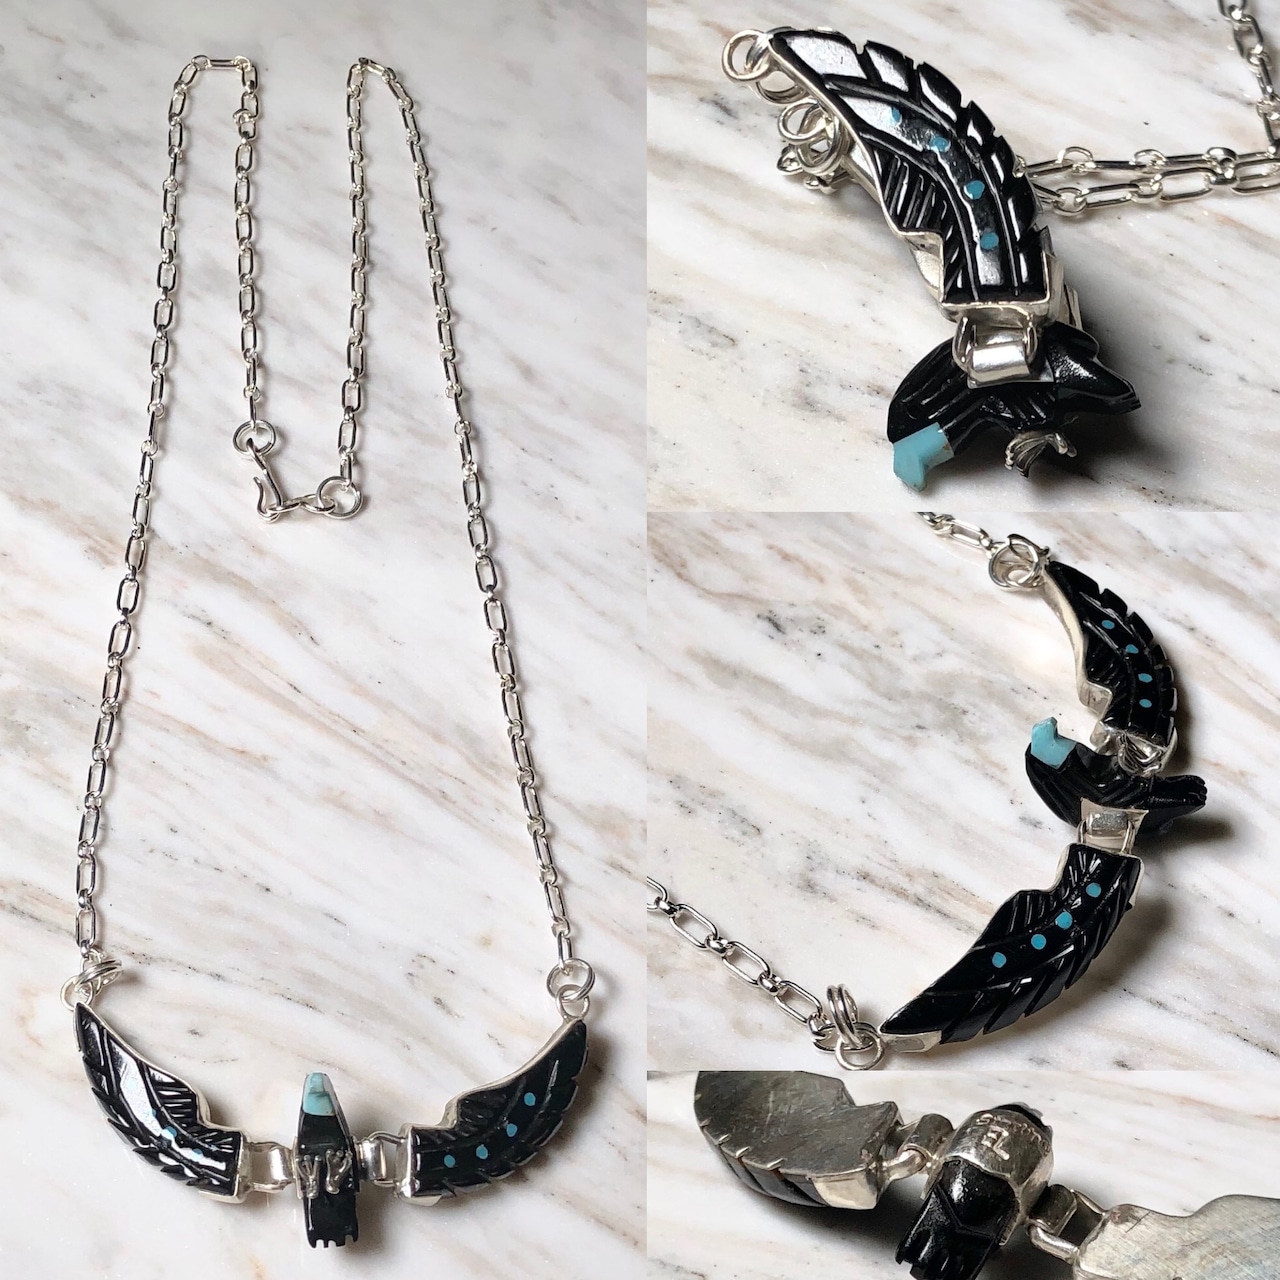 ben livingston silver eagle necklace set with turquoise&jet